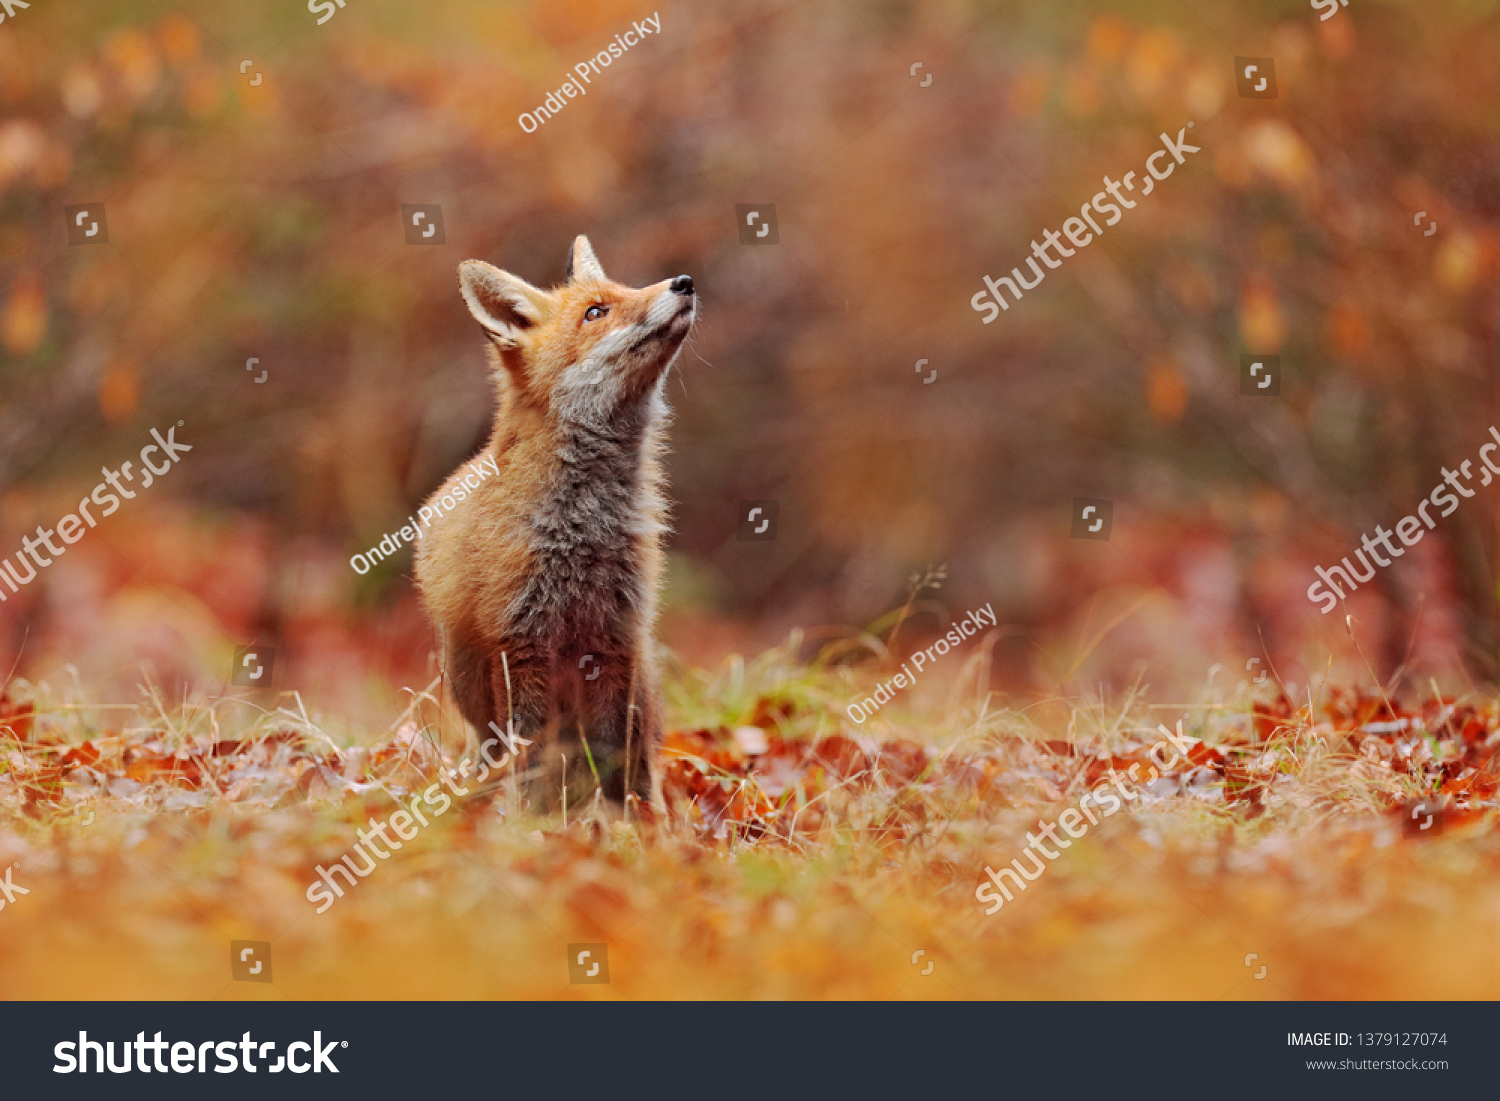 Cute Red Fox, Vulpes vulpes in fall forest. Beautiful animal in the nature habitat. Wildlife scene from the wild nature, Germany, Europe. Cute animal in habitat. Red fox running on orange autumn leave #1379127074